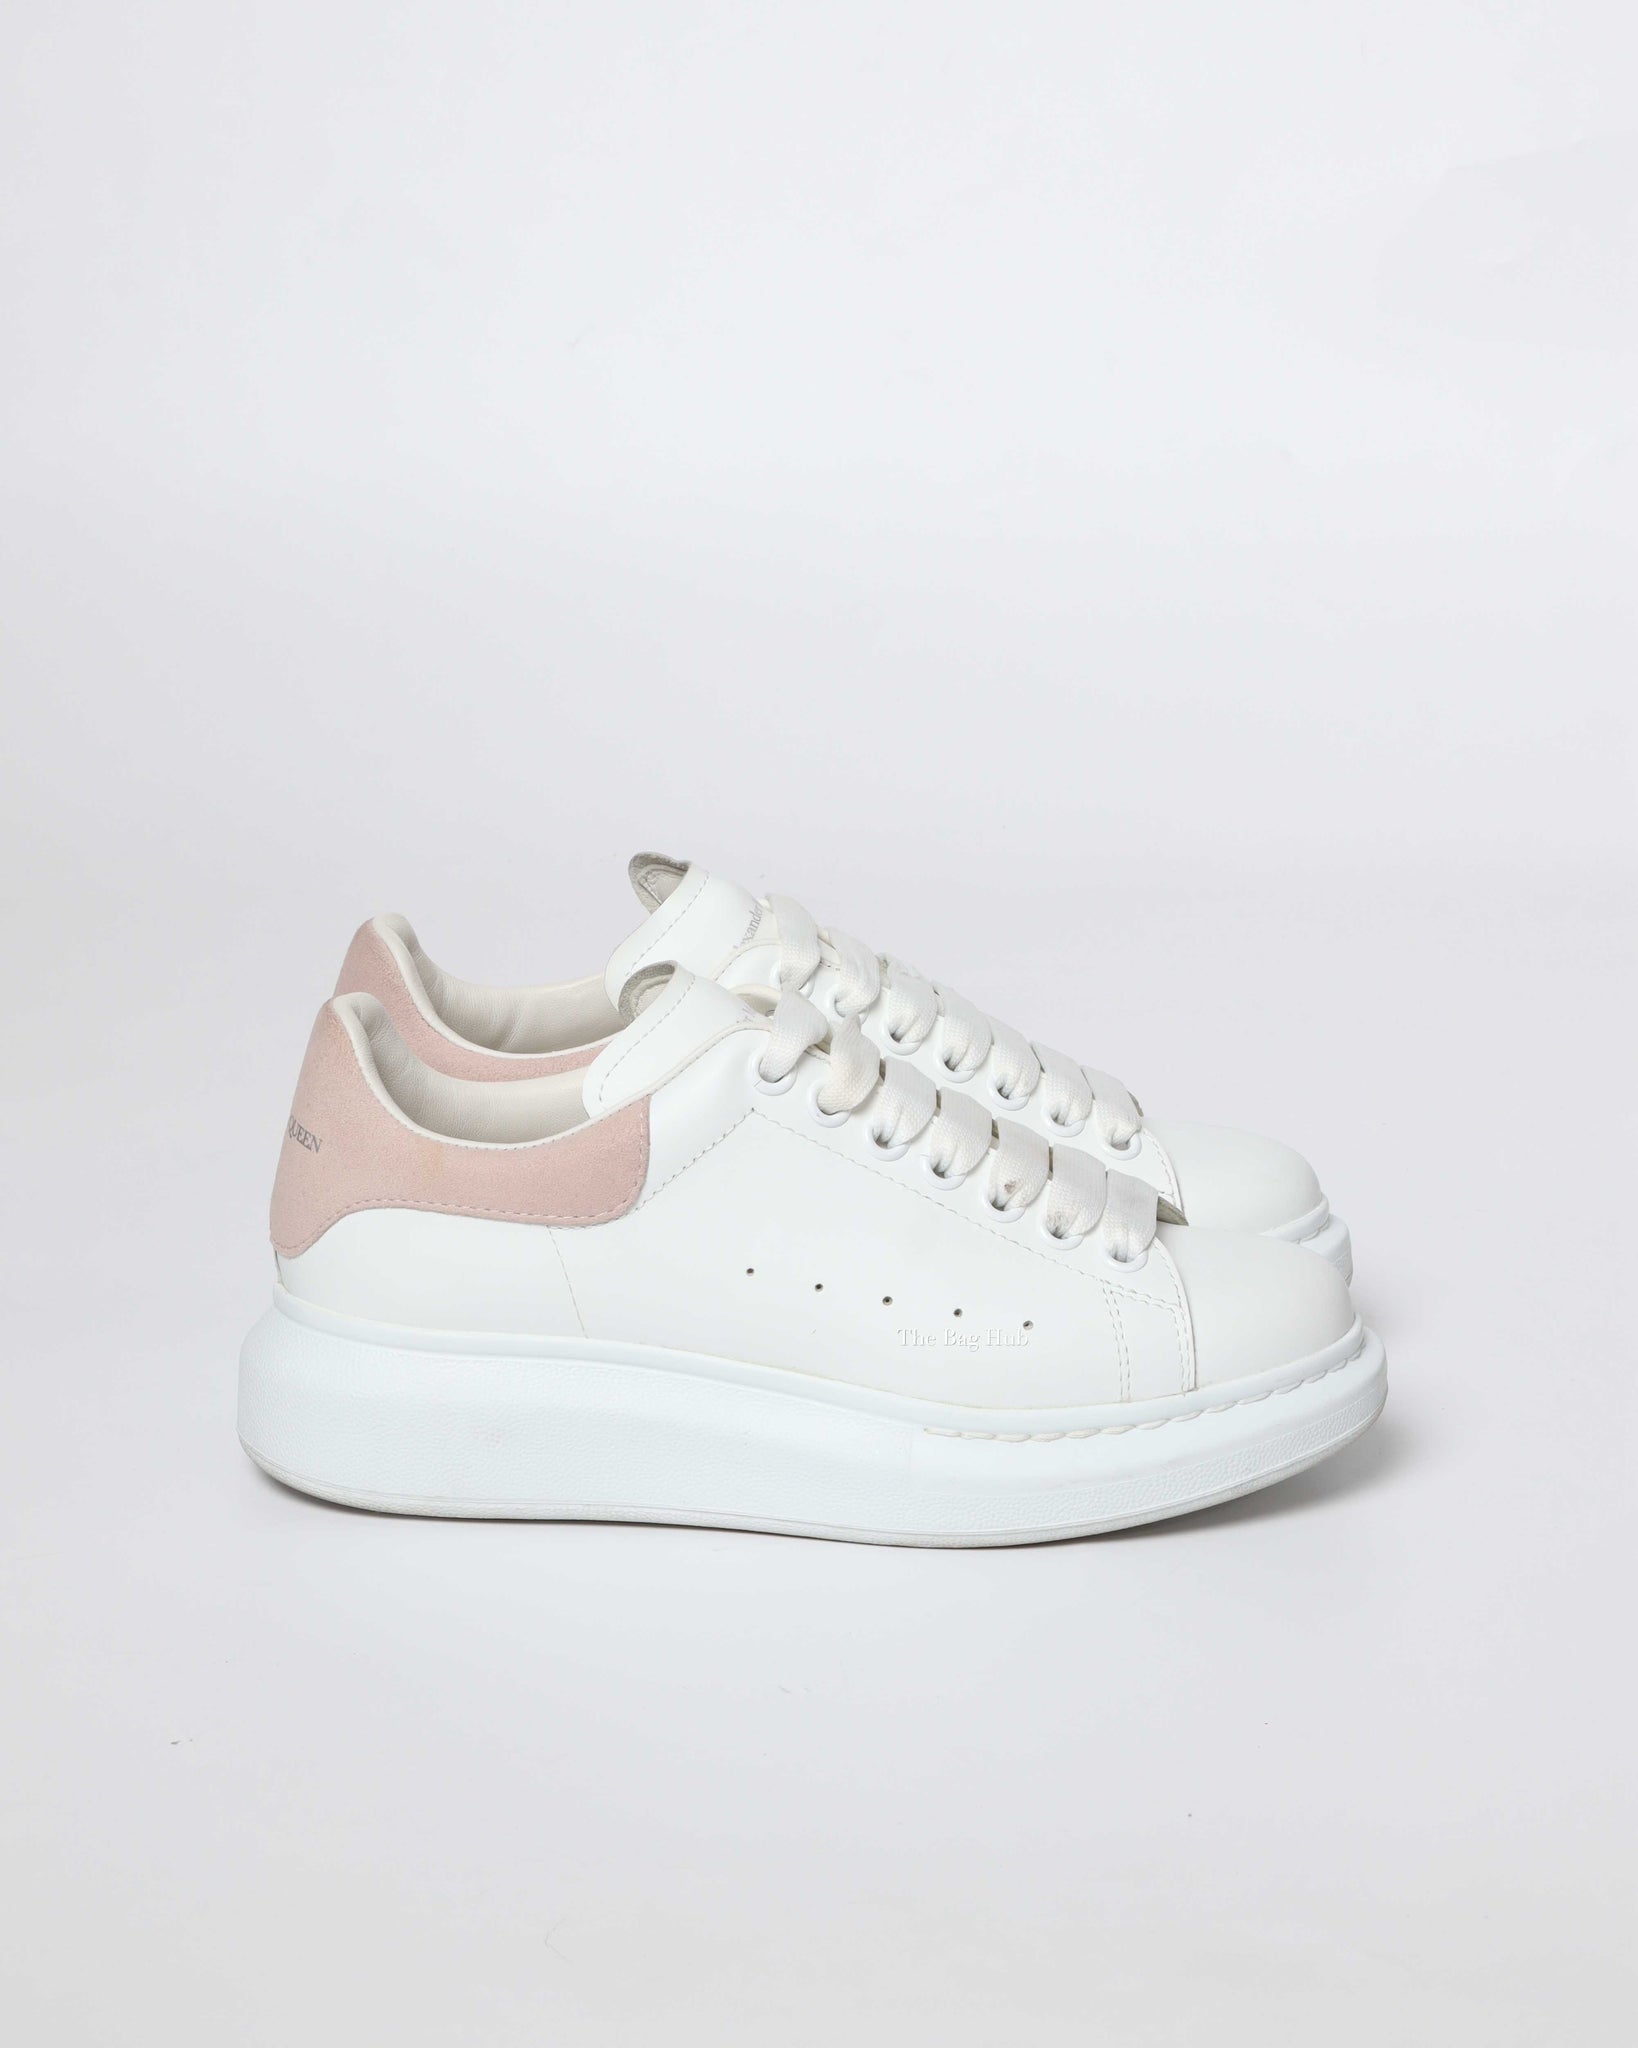 Alexander McQueen White & Pink Oversized Sneakers Size 37 - 4